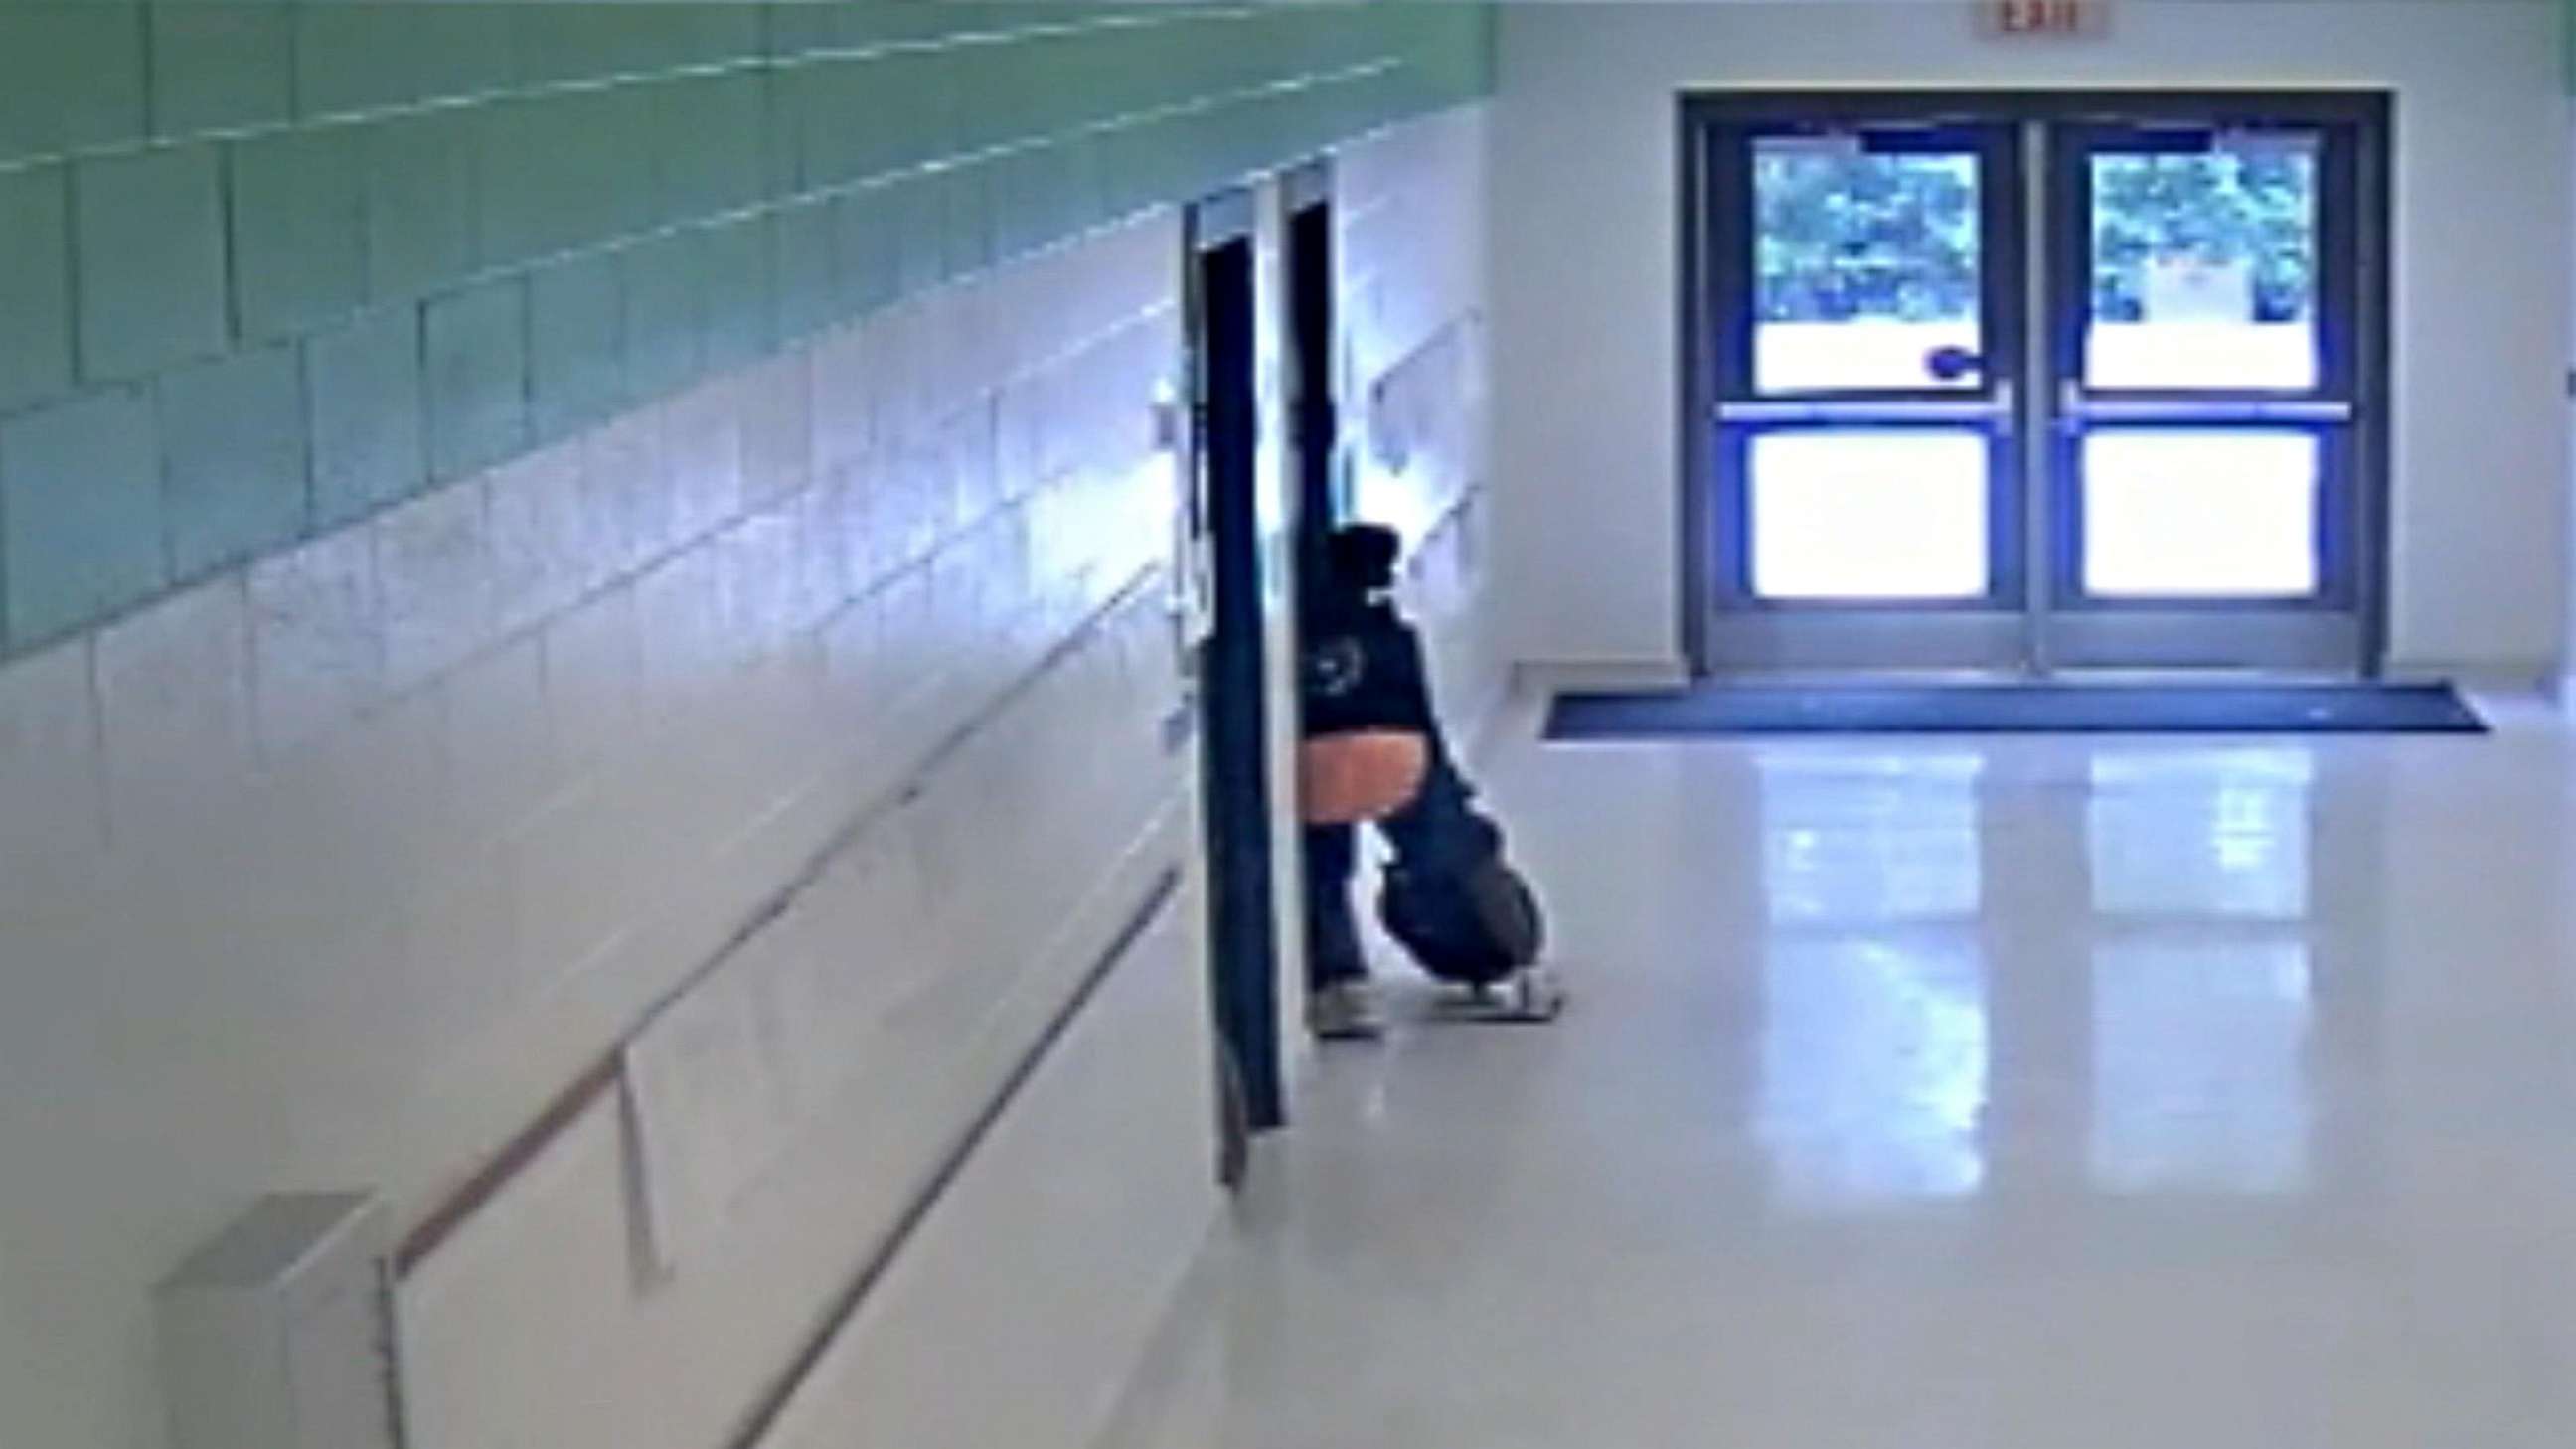 PHOTO: The boy tried to re-enter the classroom after being physically kicked out, but the teacher had locked the door.